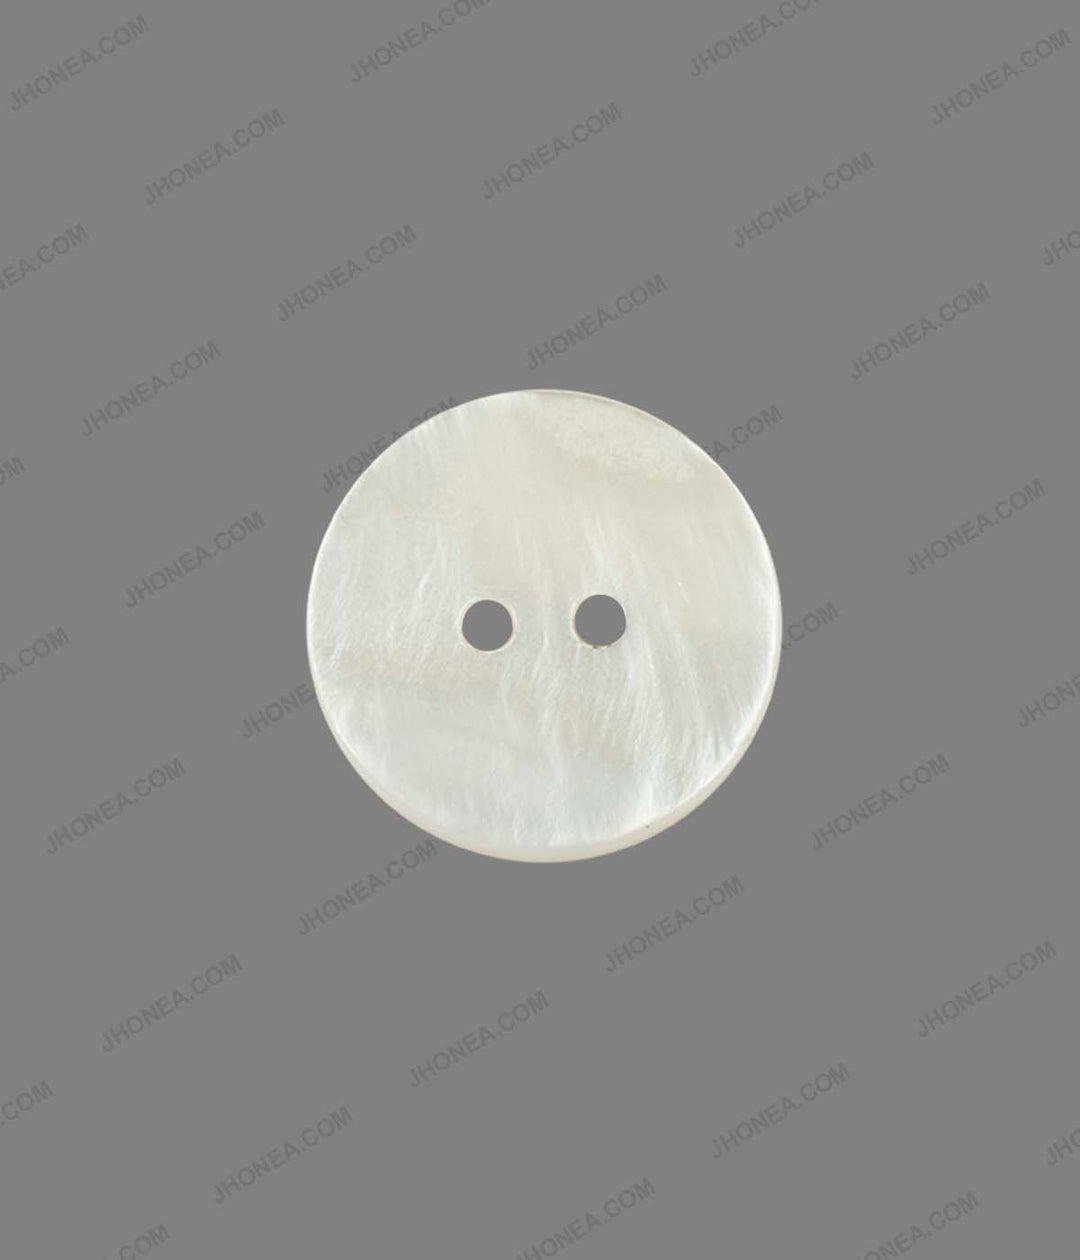 Glossy & Shiny Pearlescent White Shirt Buttons for Shirts/Blazers in White Color